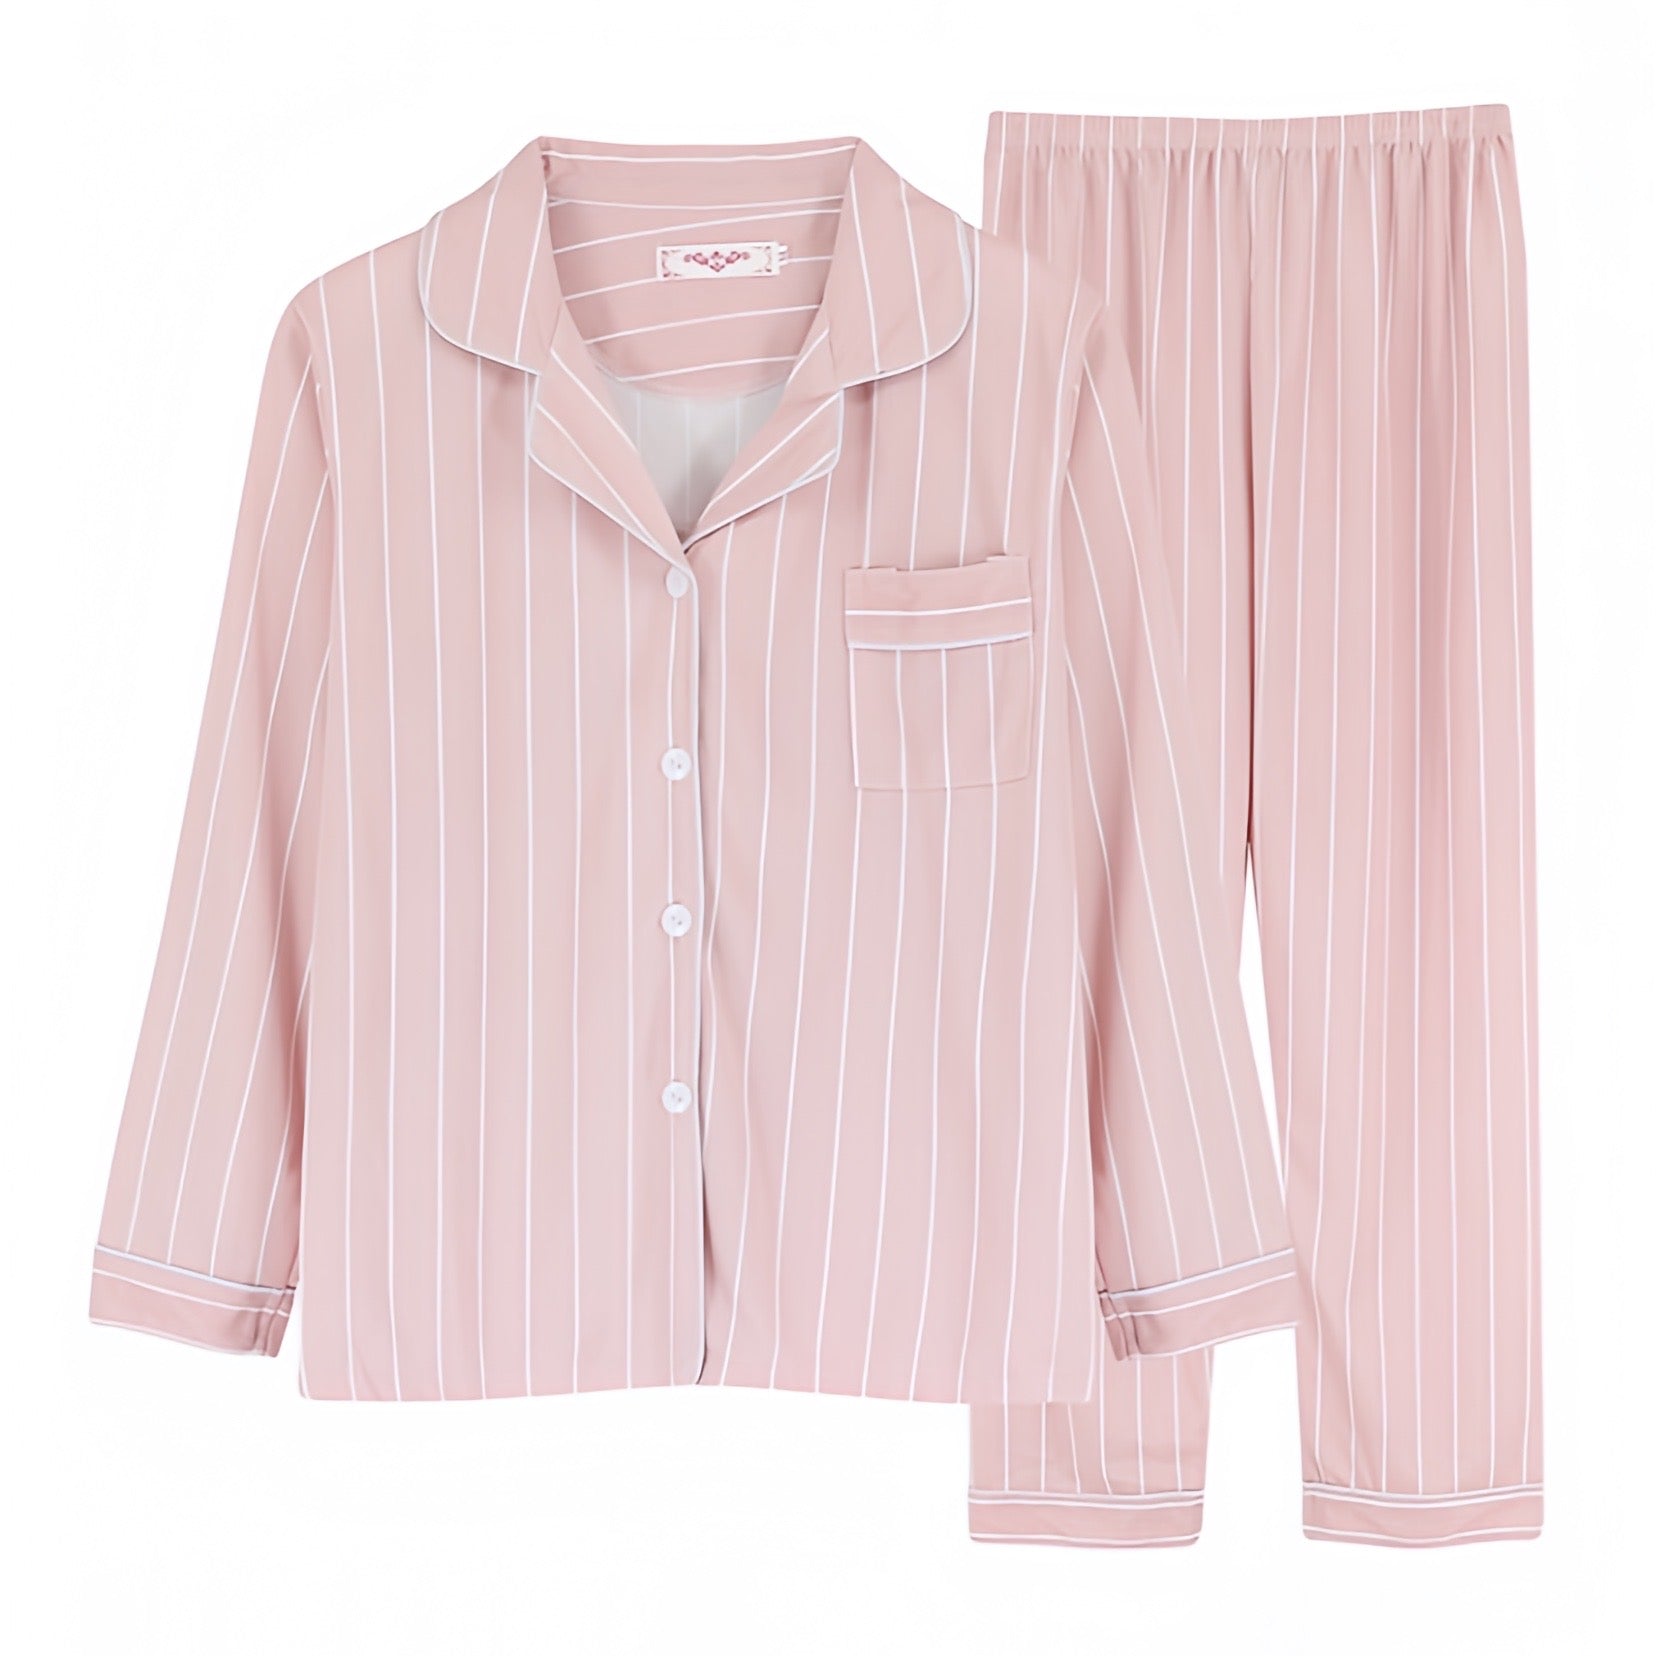 light-pink-and-white-striped-pinstriped-patterned-cotton-linen-long-sleeve-button-down-v-neck-shirt-top-mid-low-rise-waisted-pants-2-piece-pajama-set-sleepwear-pjs-intimates-comfy-cozy-women-ladies-teens-tweens-chic-trendy-spring-2024-summer-elegant-casual-preppy-style-pajamas-roller-rabbit-eberjey-victorias-secret-dupe